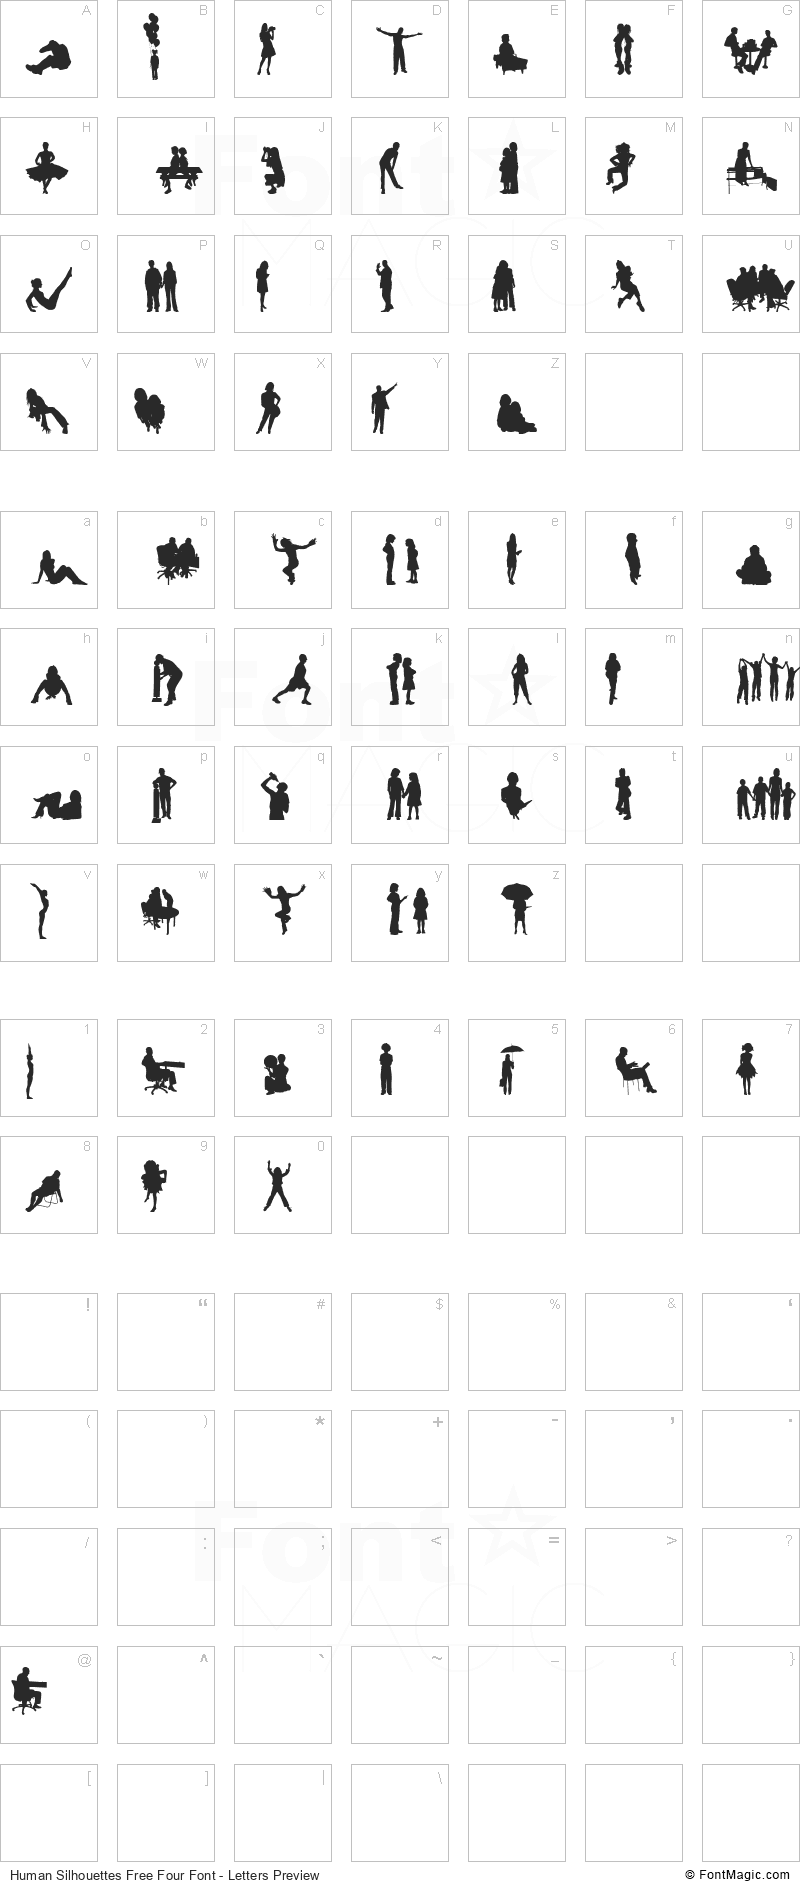 Human Silhouettes Free Four Font - All Latters Preview Chart